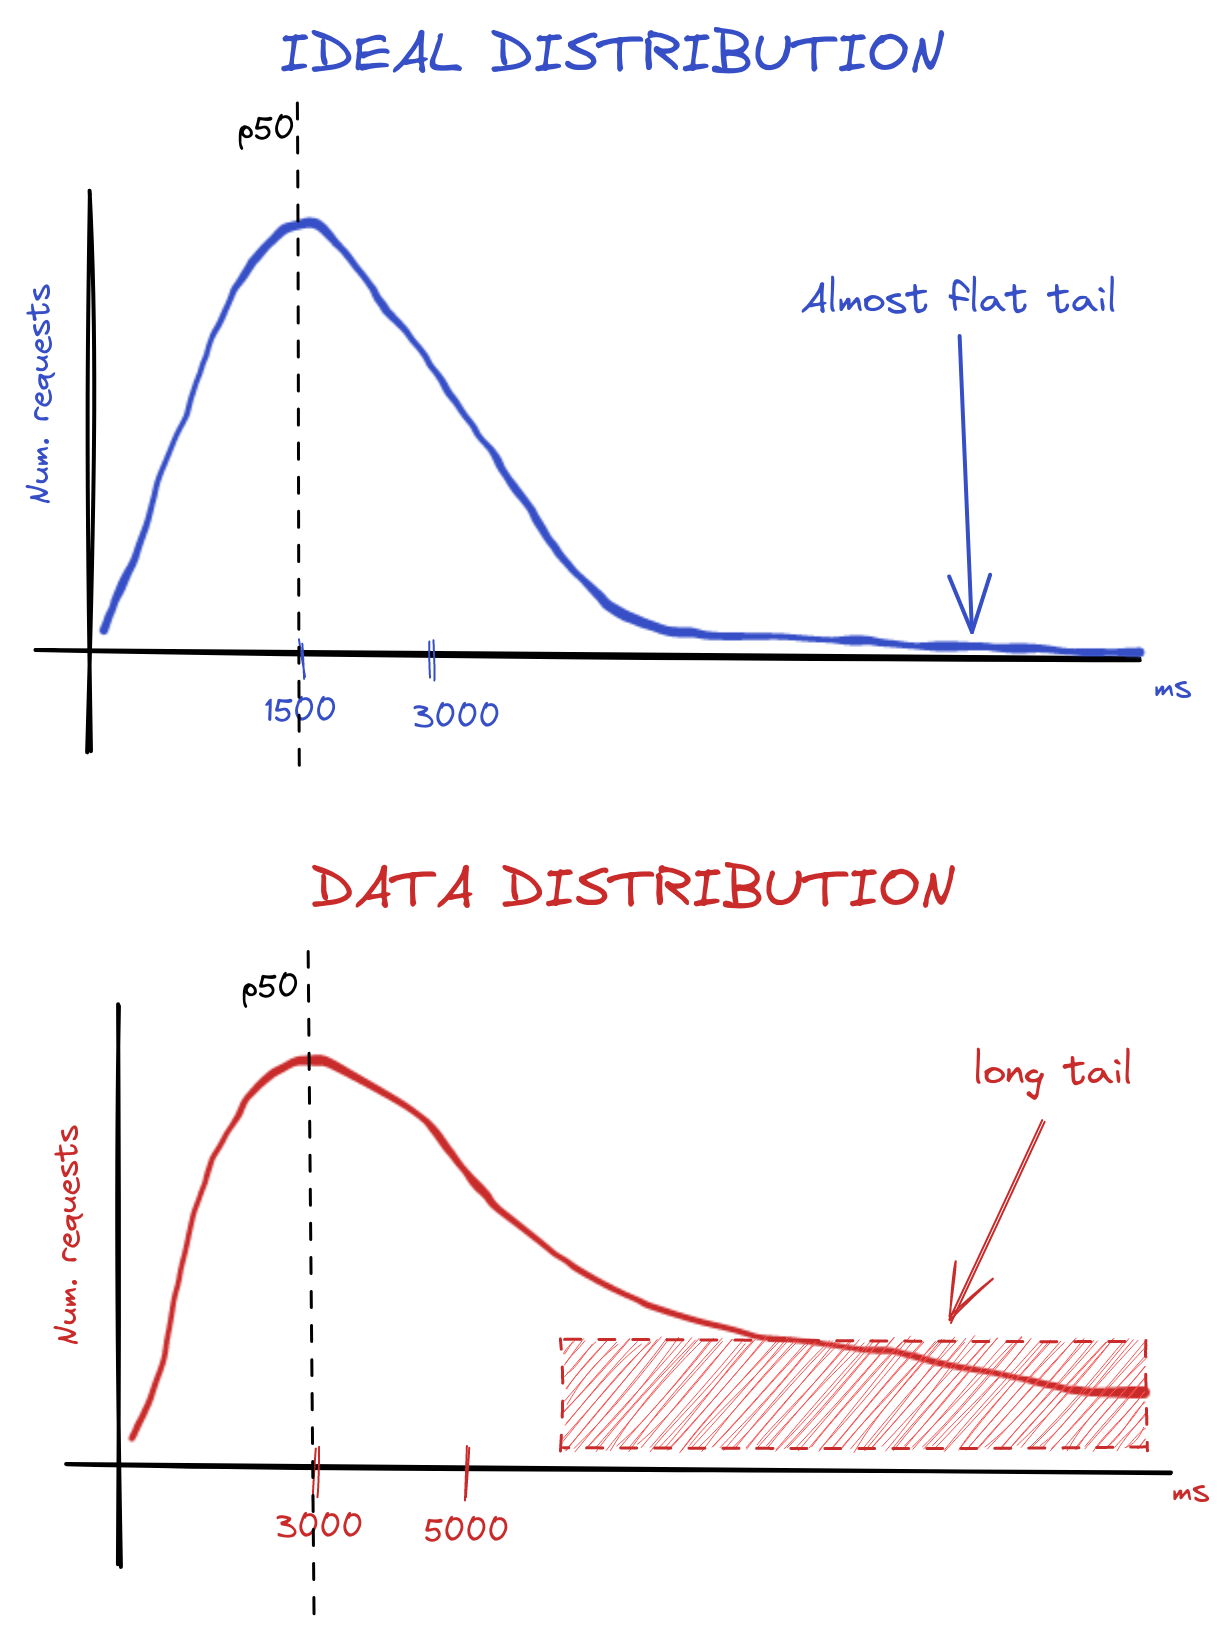 Two distributions. One ideal and one with a long tail